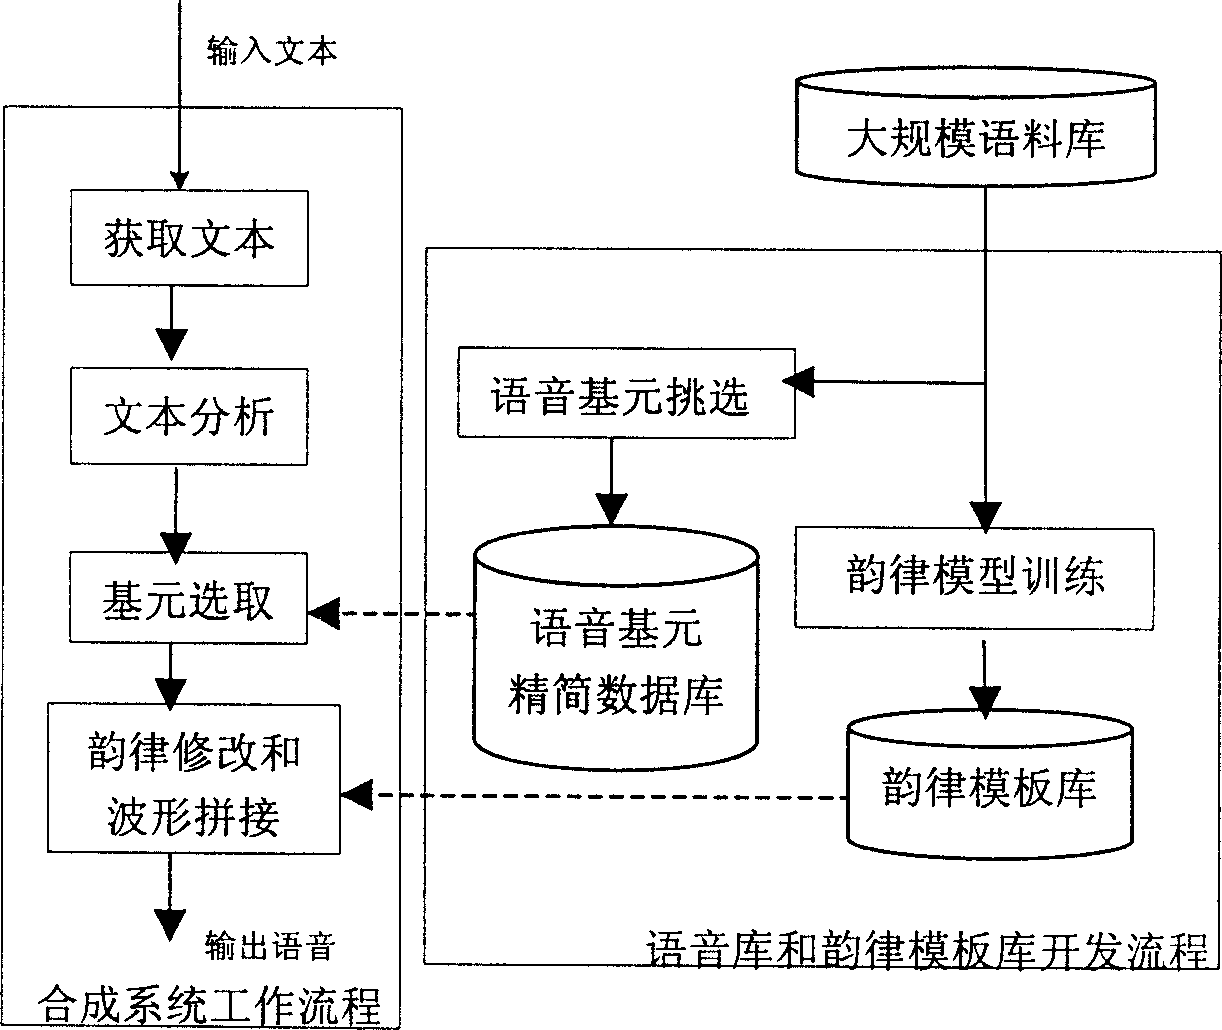 Mobile speech synthesis method